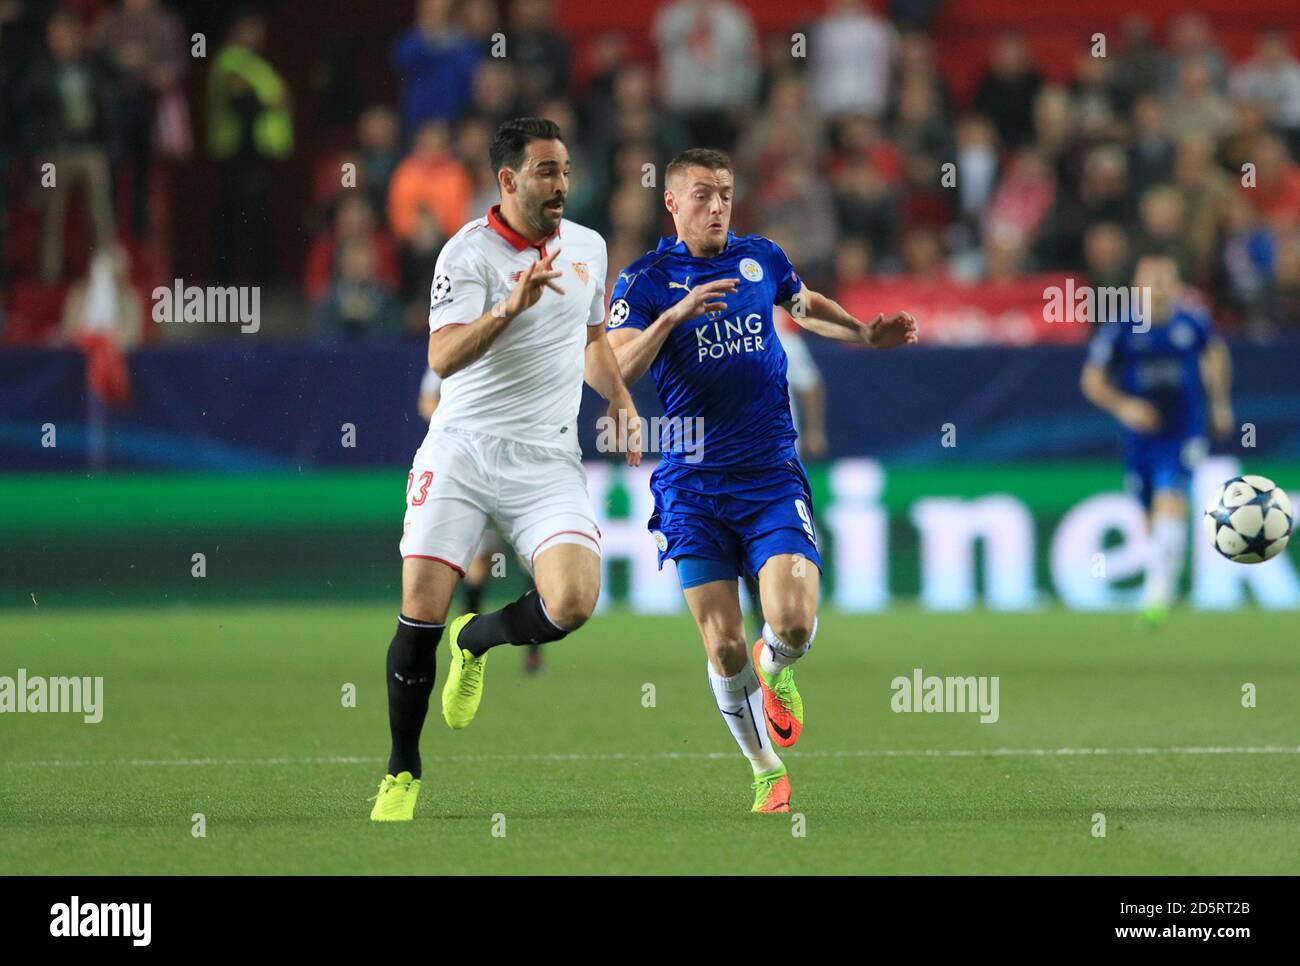 Sevilla's Adil Rami (left) and Leicester City's Jamie Vardy (right) battle for the ball Stock Photo